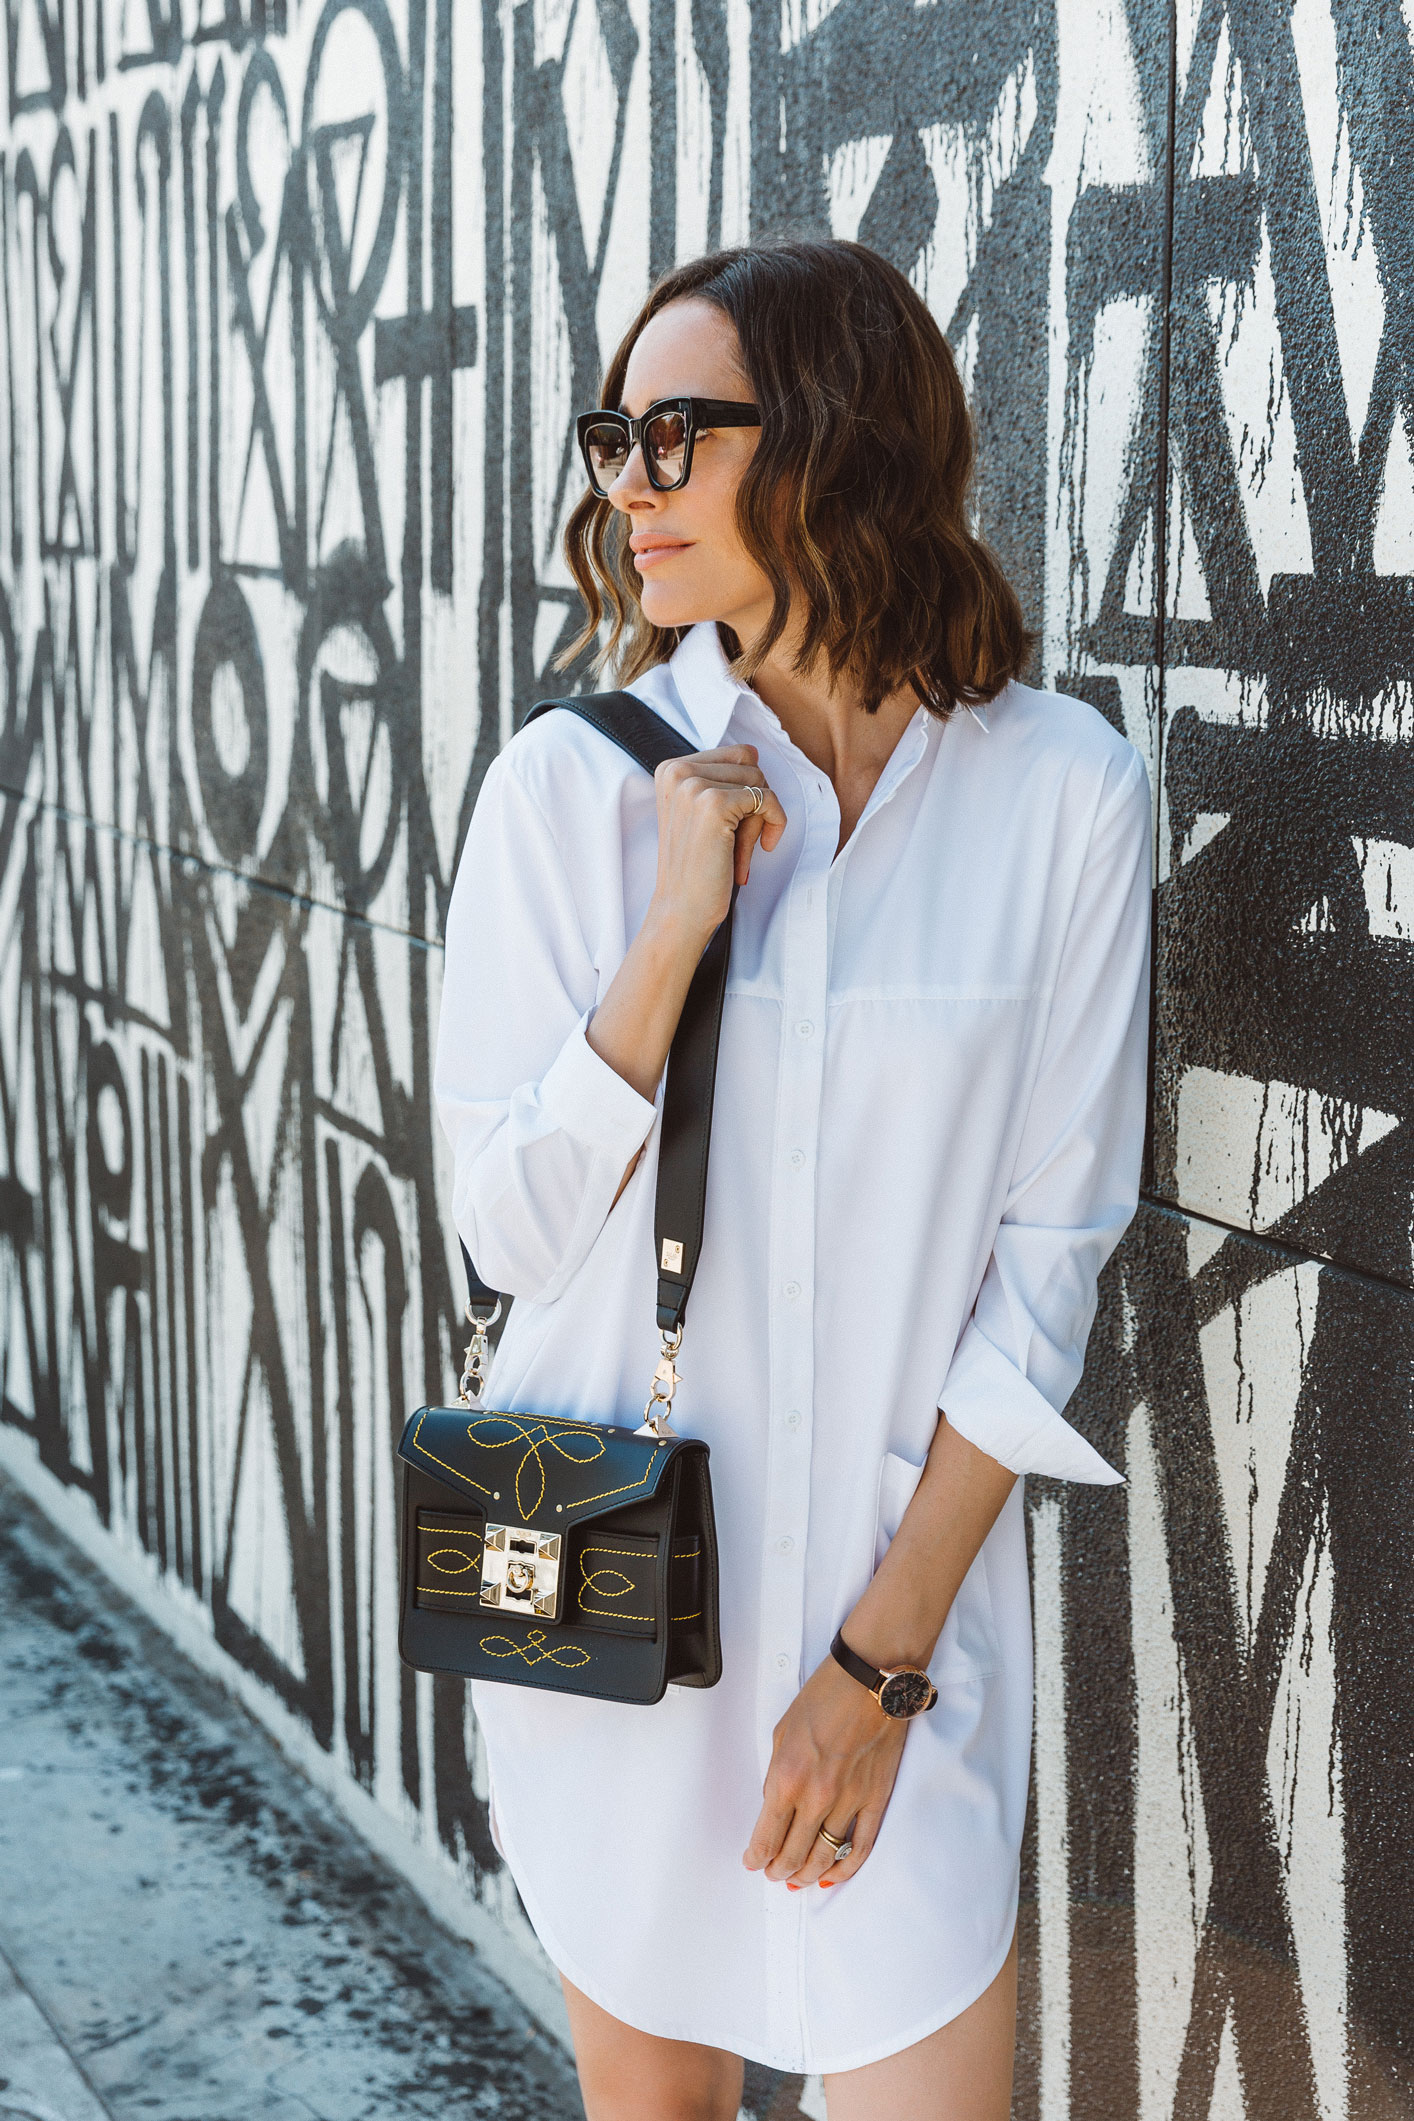 Louise Roe on the psychology of fashion wearing a white shirt dress